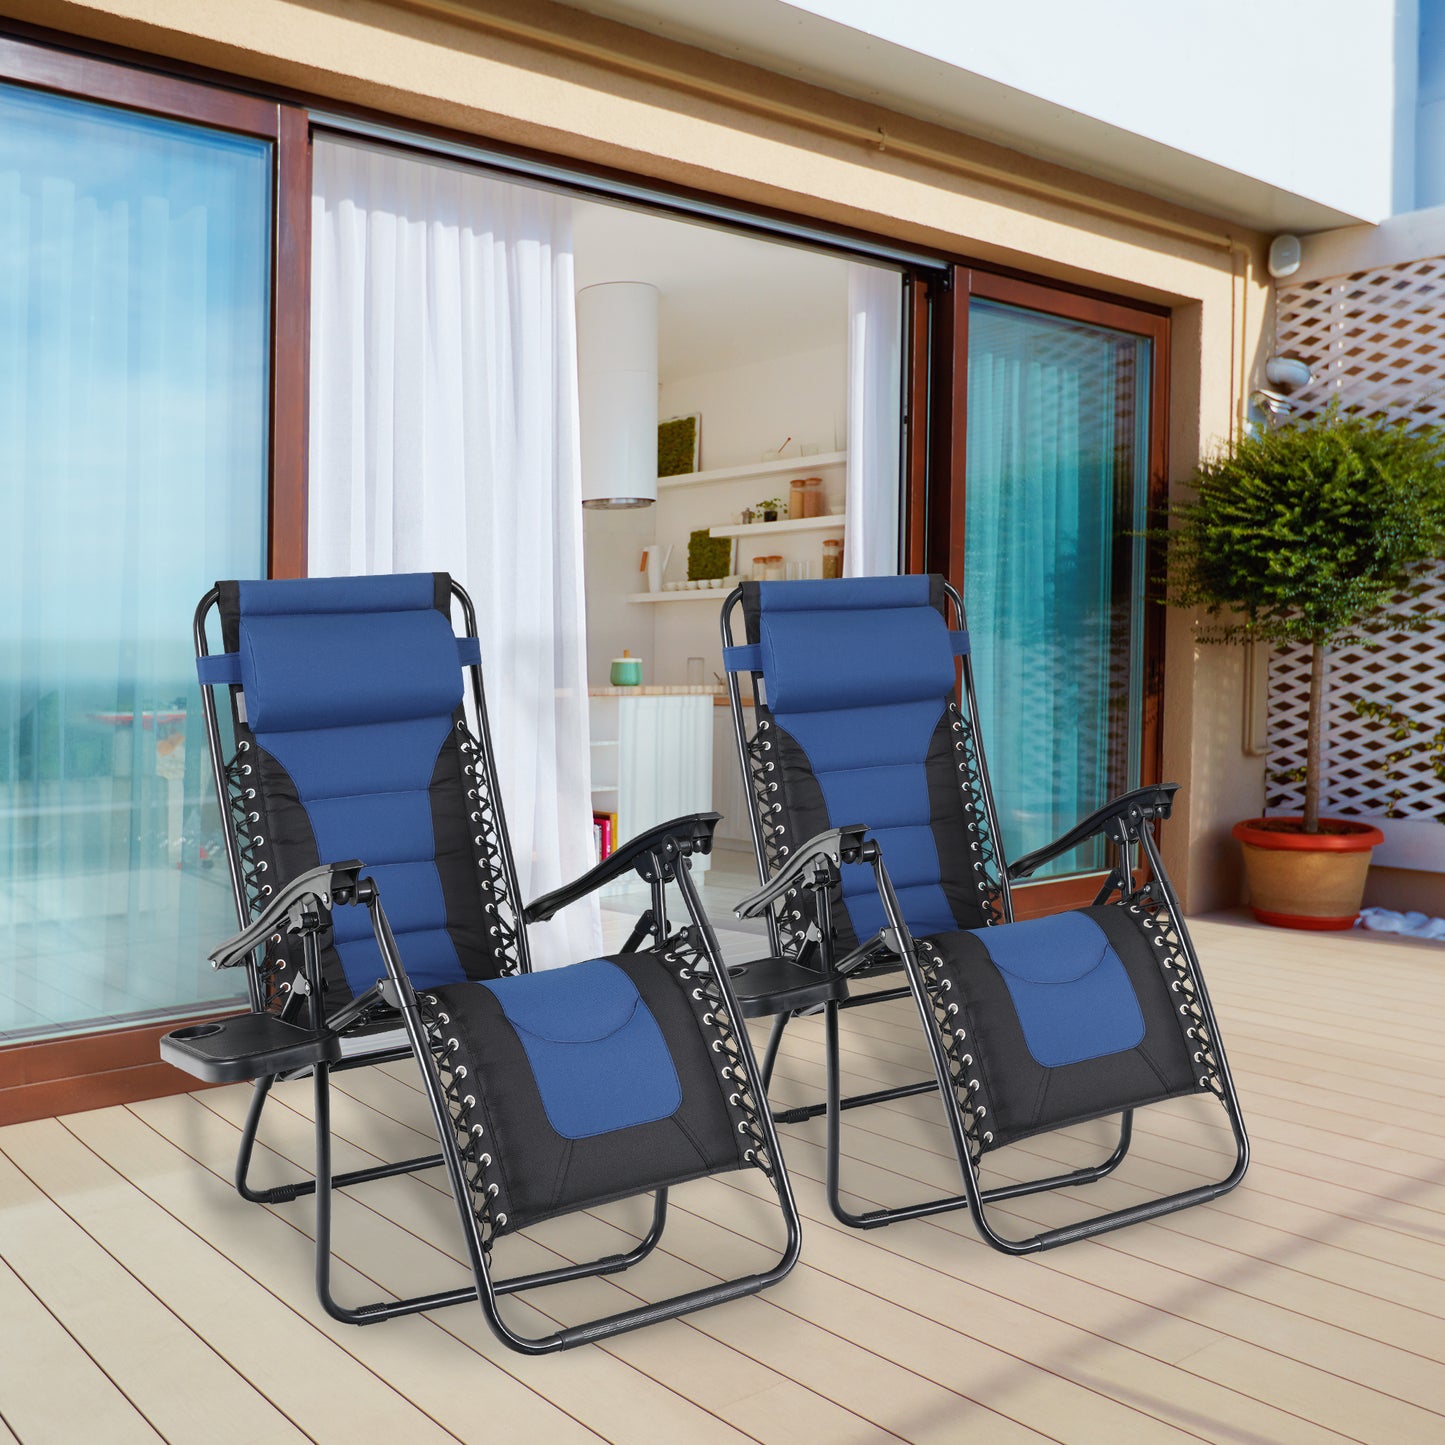 Sophia&William Set of 2 Outdoor Zero Gravity Chairs Padded Camping Lounge Recliner - Blue